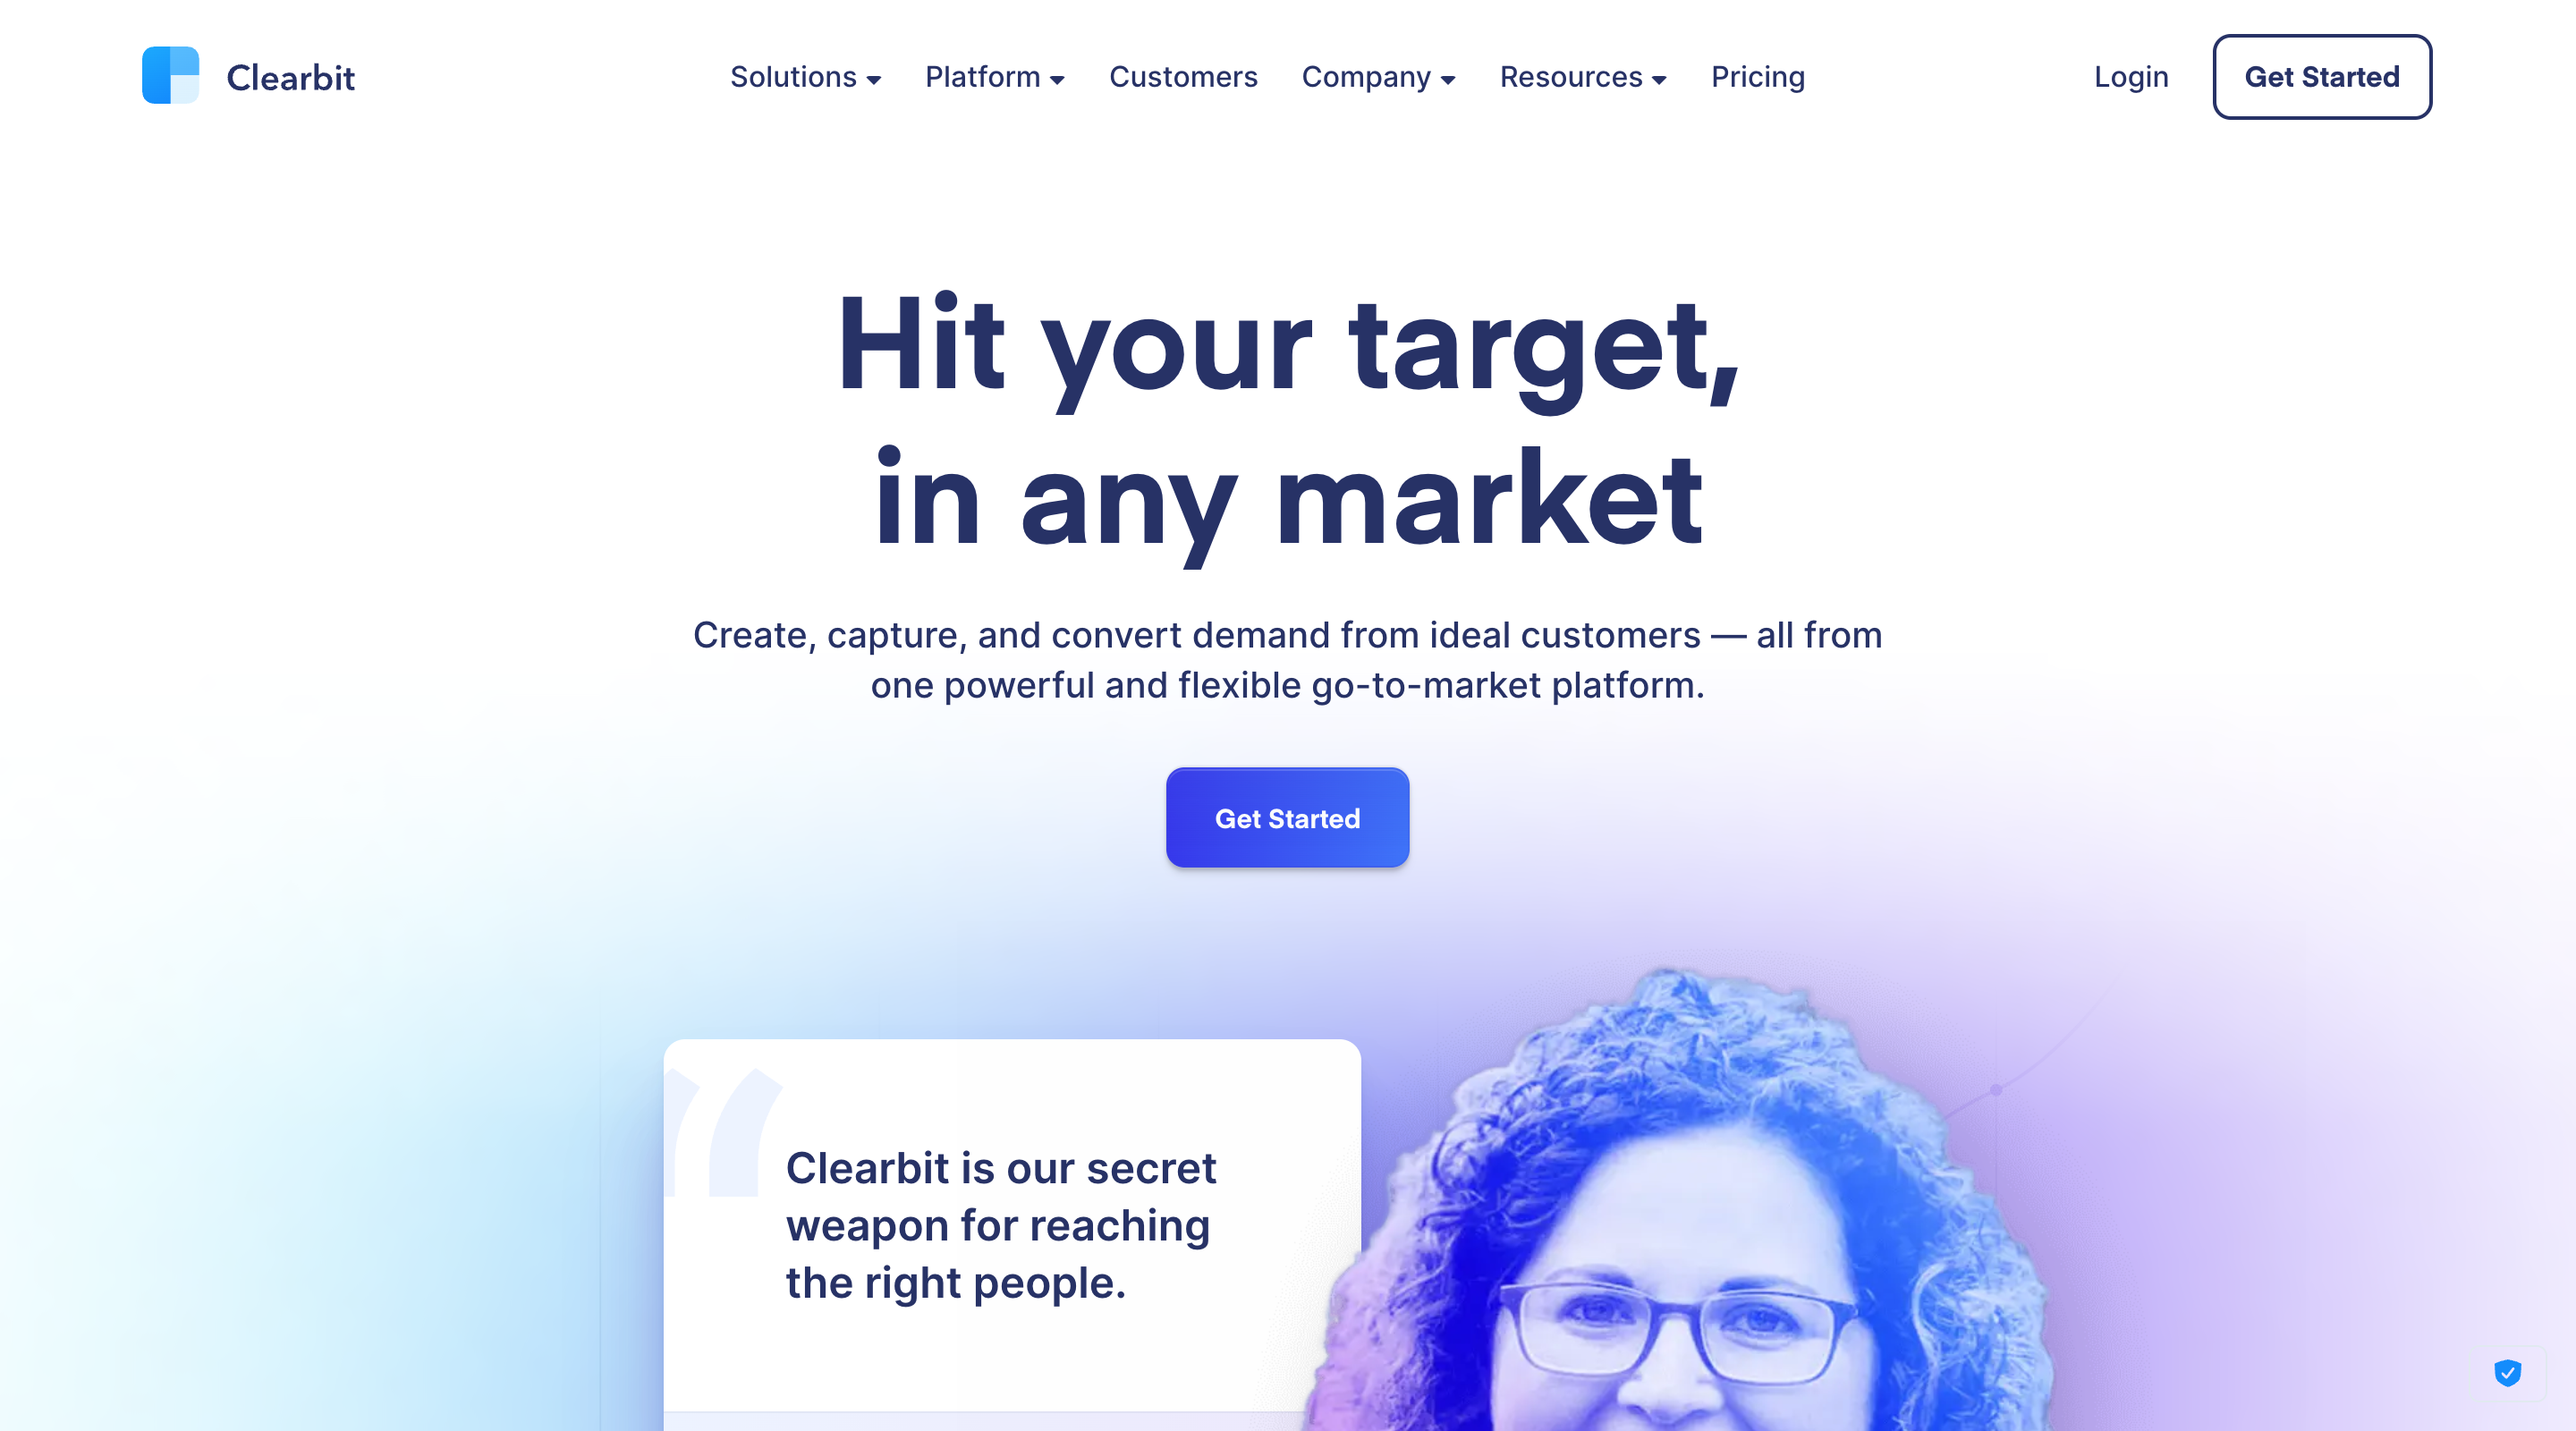 Screenshot of the Clearbit home page. A header contains the logo, the primary site navigation, and calls-to-action to 'Login' or 'Get Started'. The hero section contains a short paragraph and an additional 'Get Started' call-to-action button.